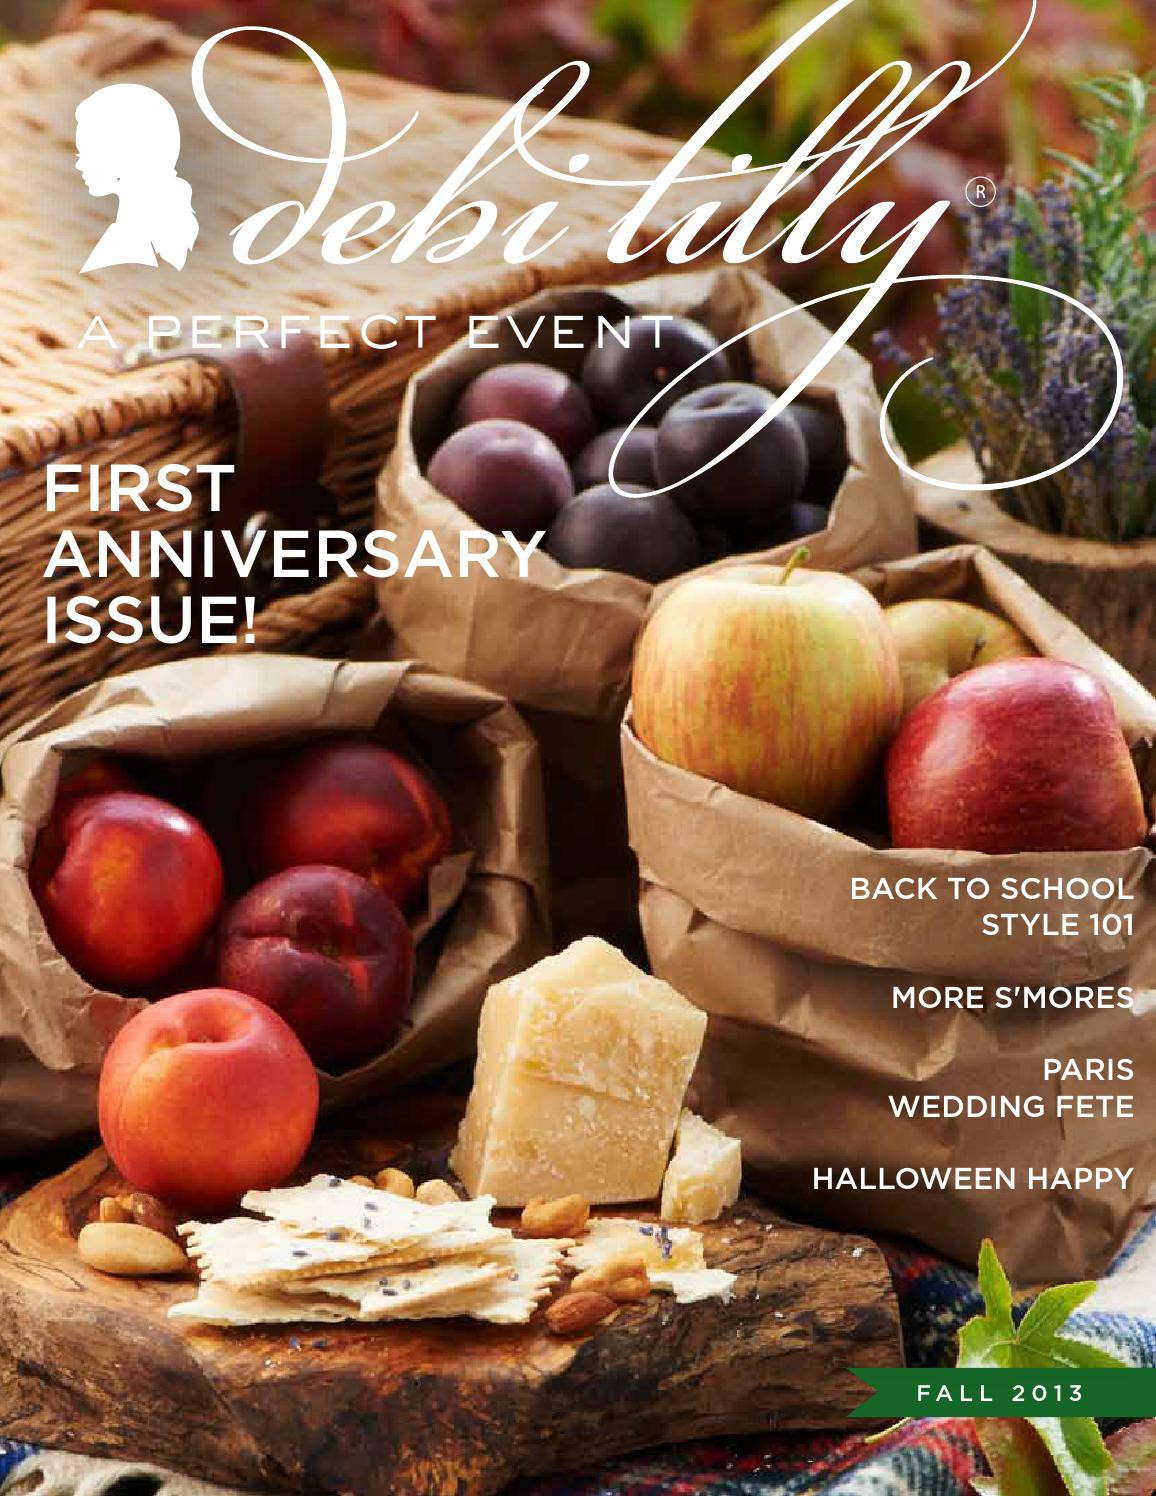 27 Elegant Debi Lilly Vases for Sale 2022 free download debi lilly vases for sale of debi lilly a perfect event fall 2013 by debi lilly style issuu pertaining to page 1